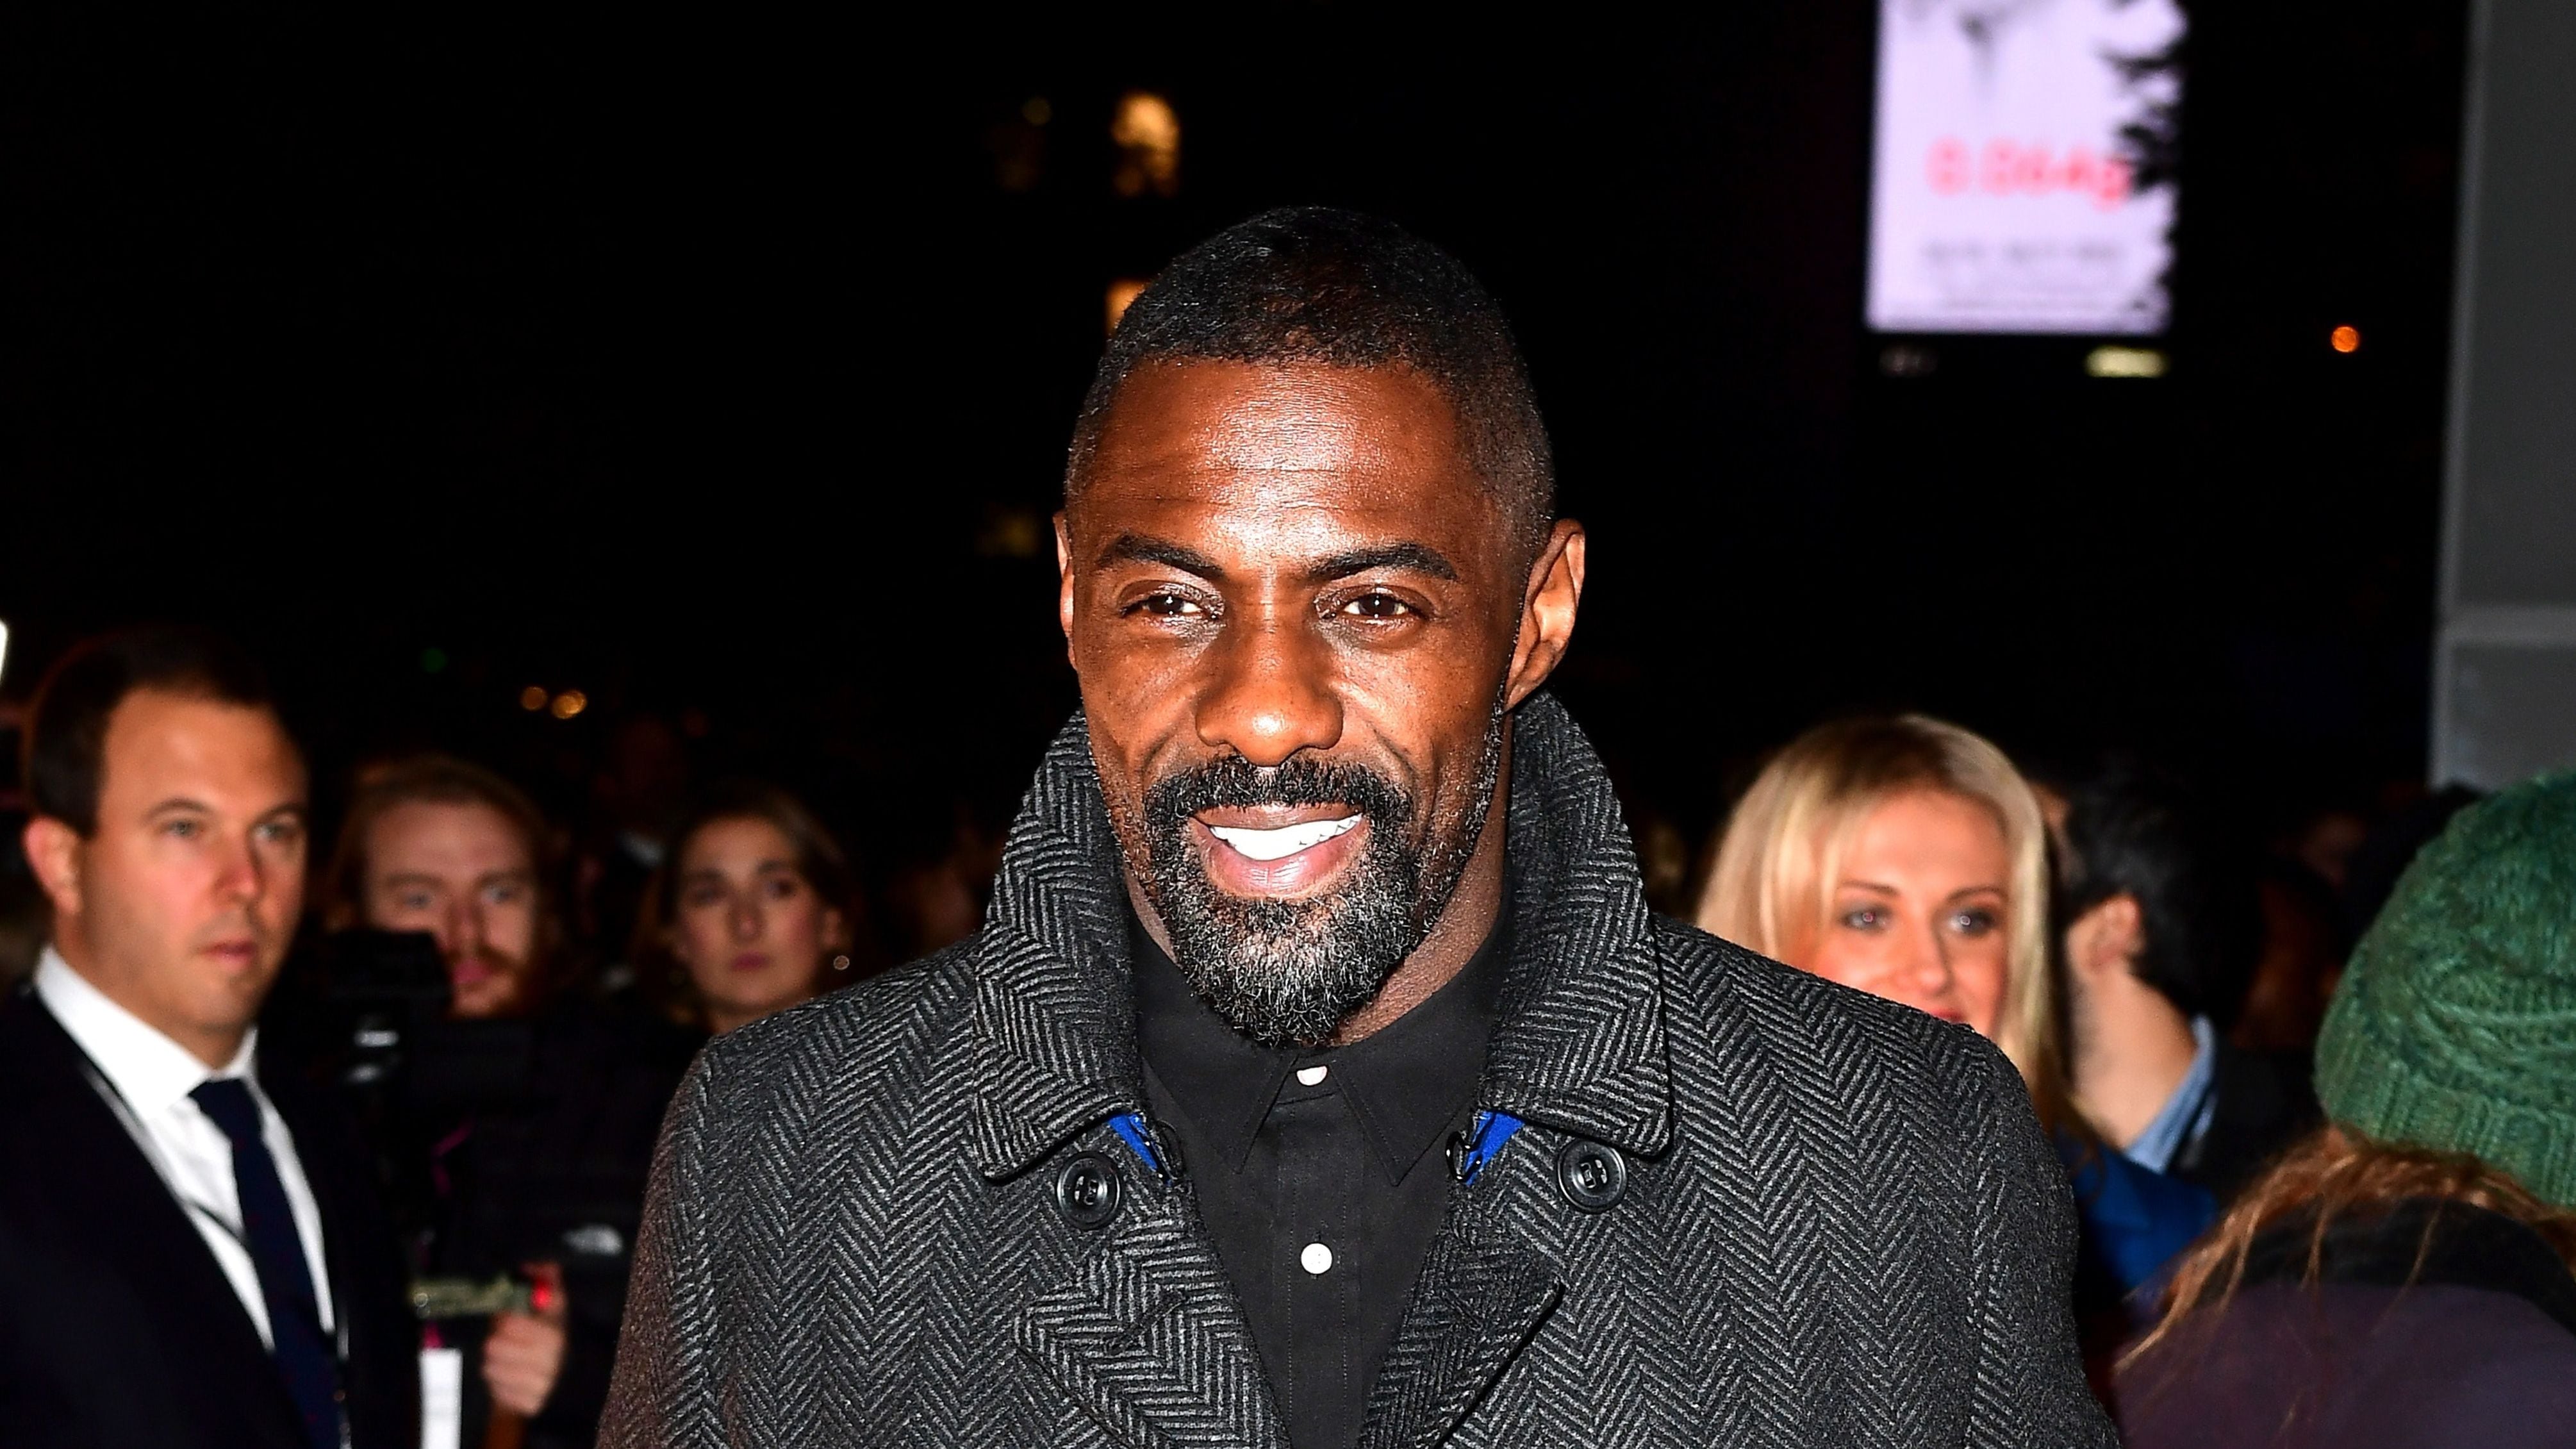 Idris Elba and Rachel Riley are voted best bottoms, while Carol Vorderman and Jamie Dornan bring up the rear.